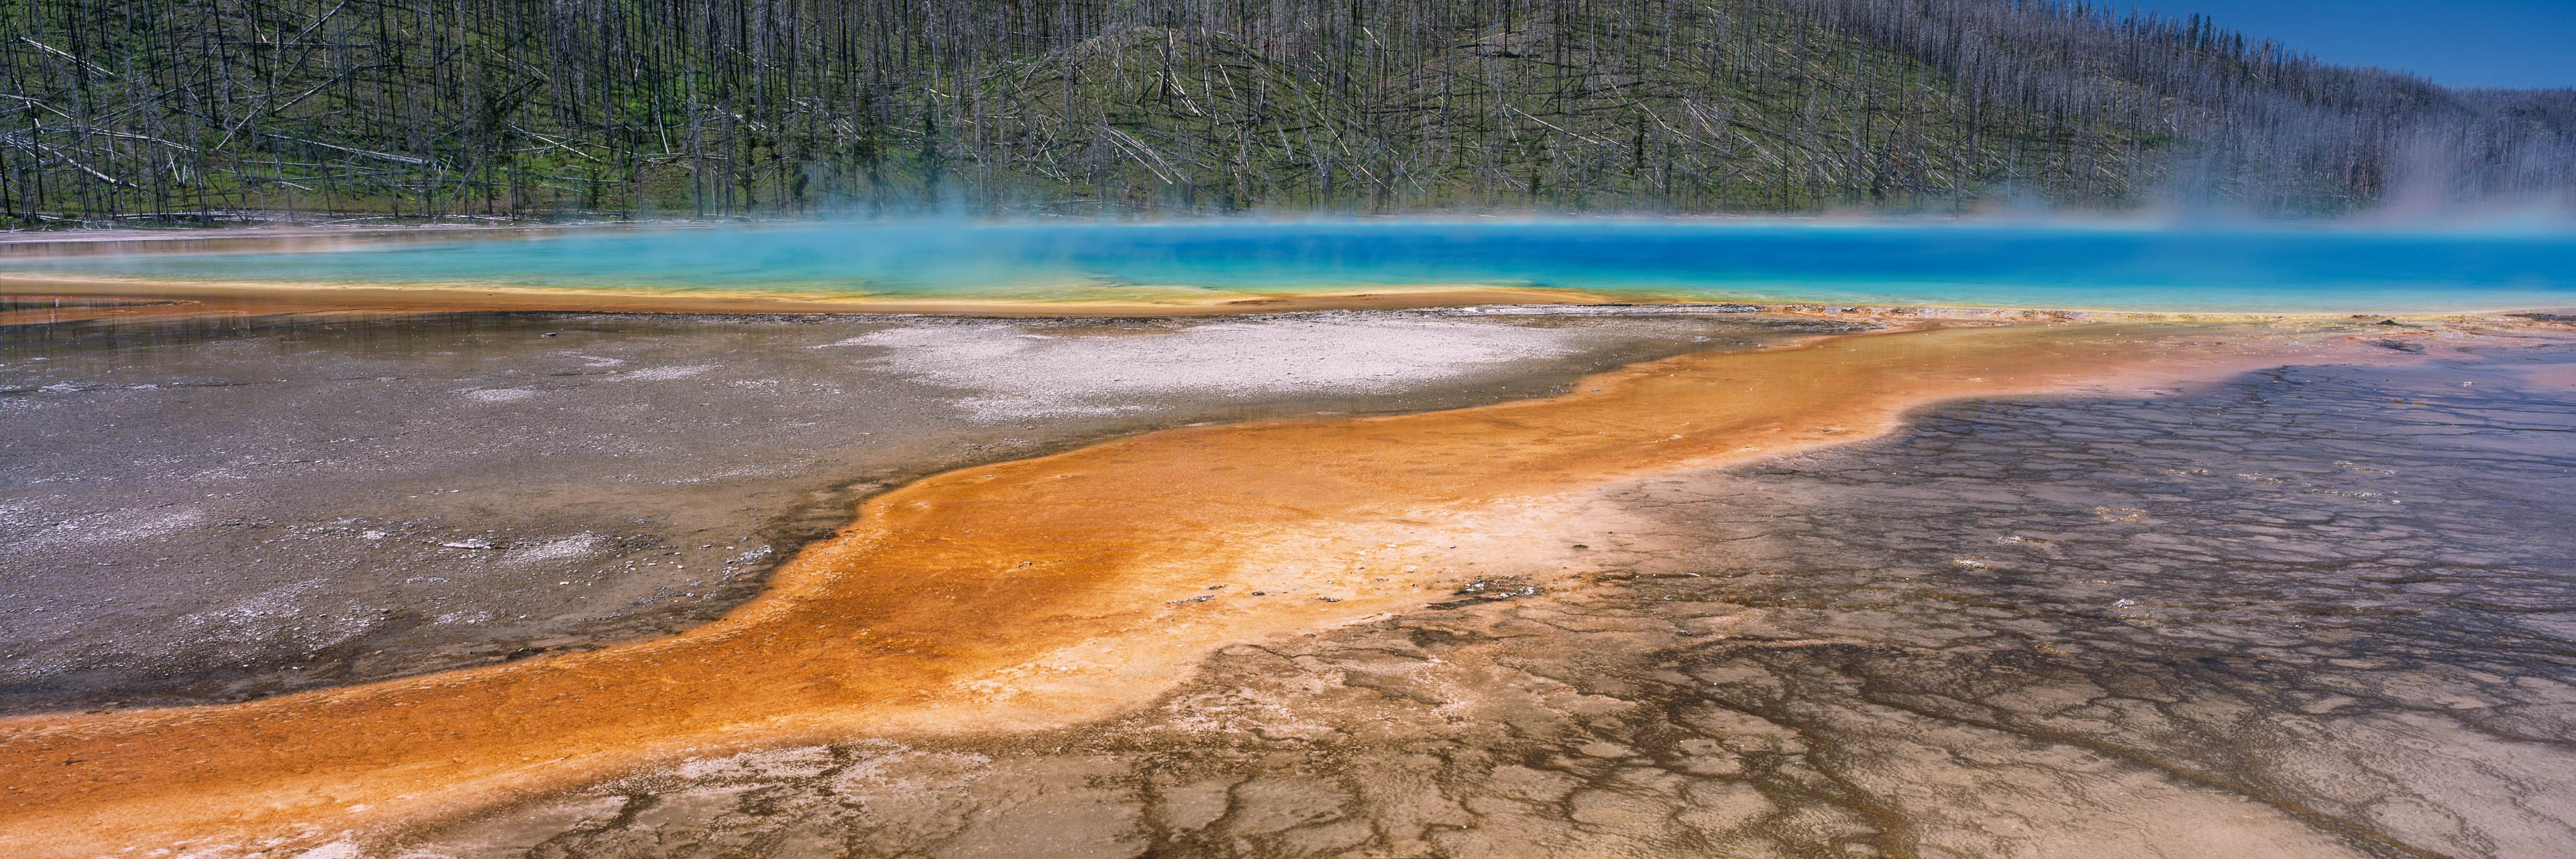 Grand Prismatic Spring, Yellowstone National Park, Wyoming,USA (39805)